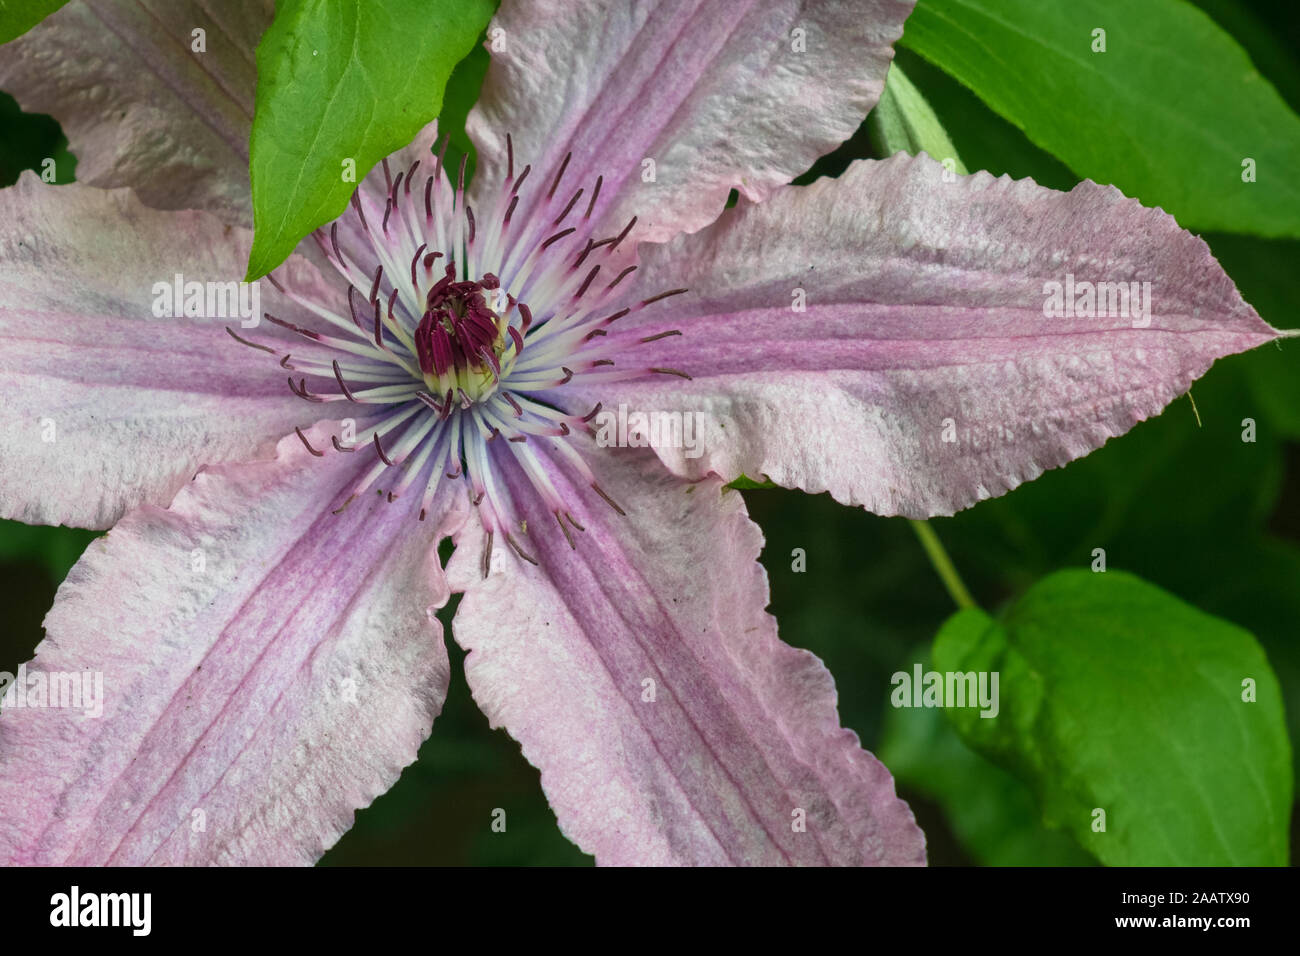 Detailed view of Clematis cultivar 'Hagley Hybrid'. Light rose to pink flowered clematis in a botanical garden. Stock Photo